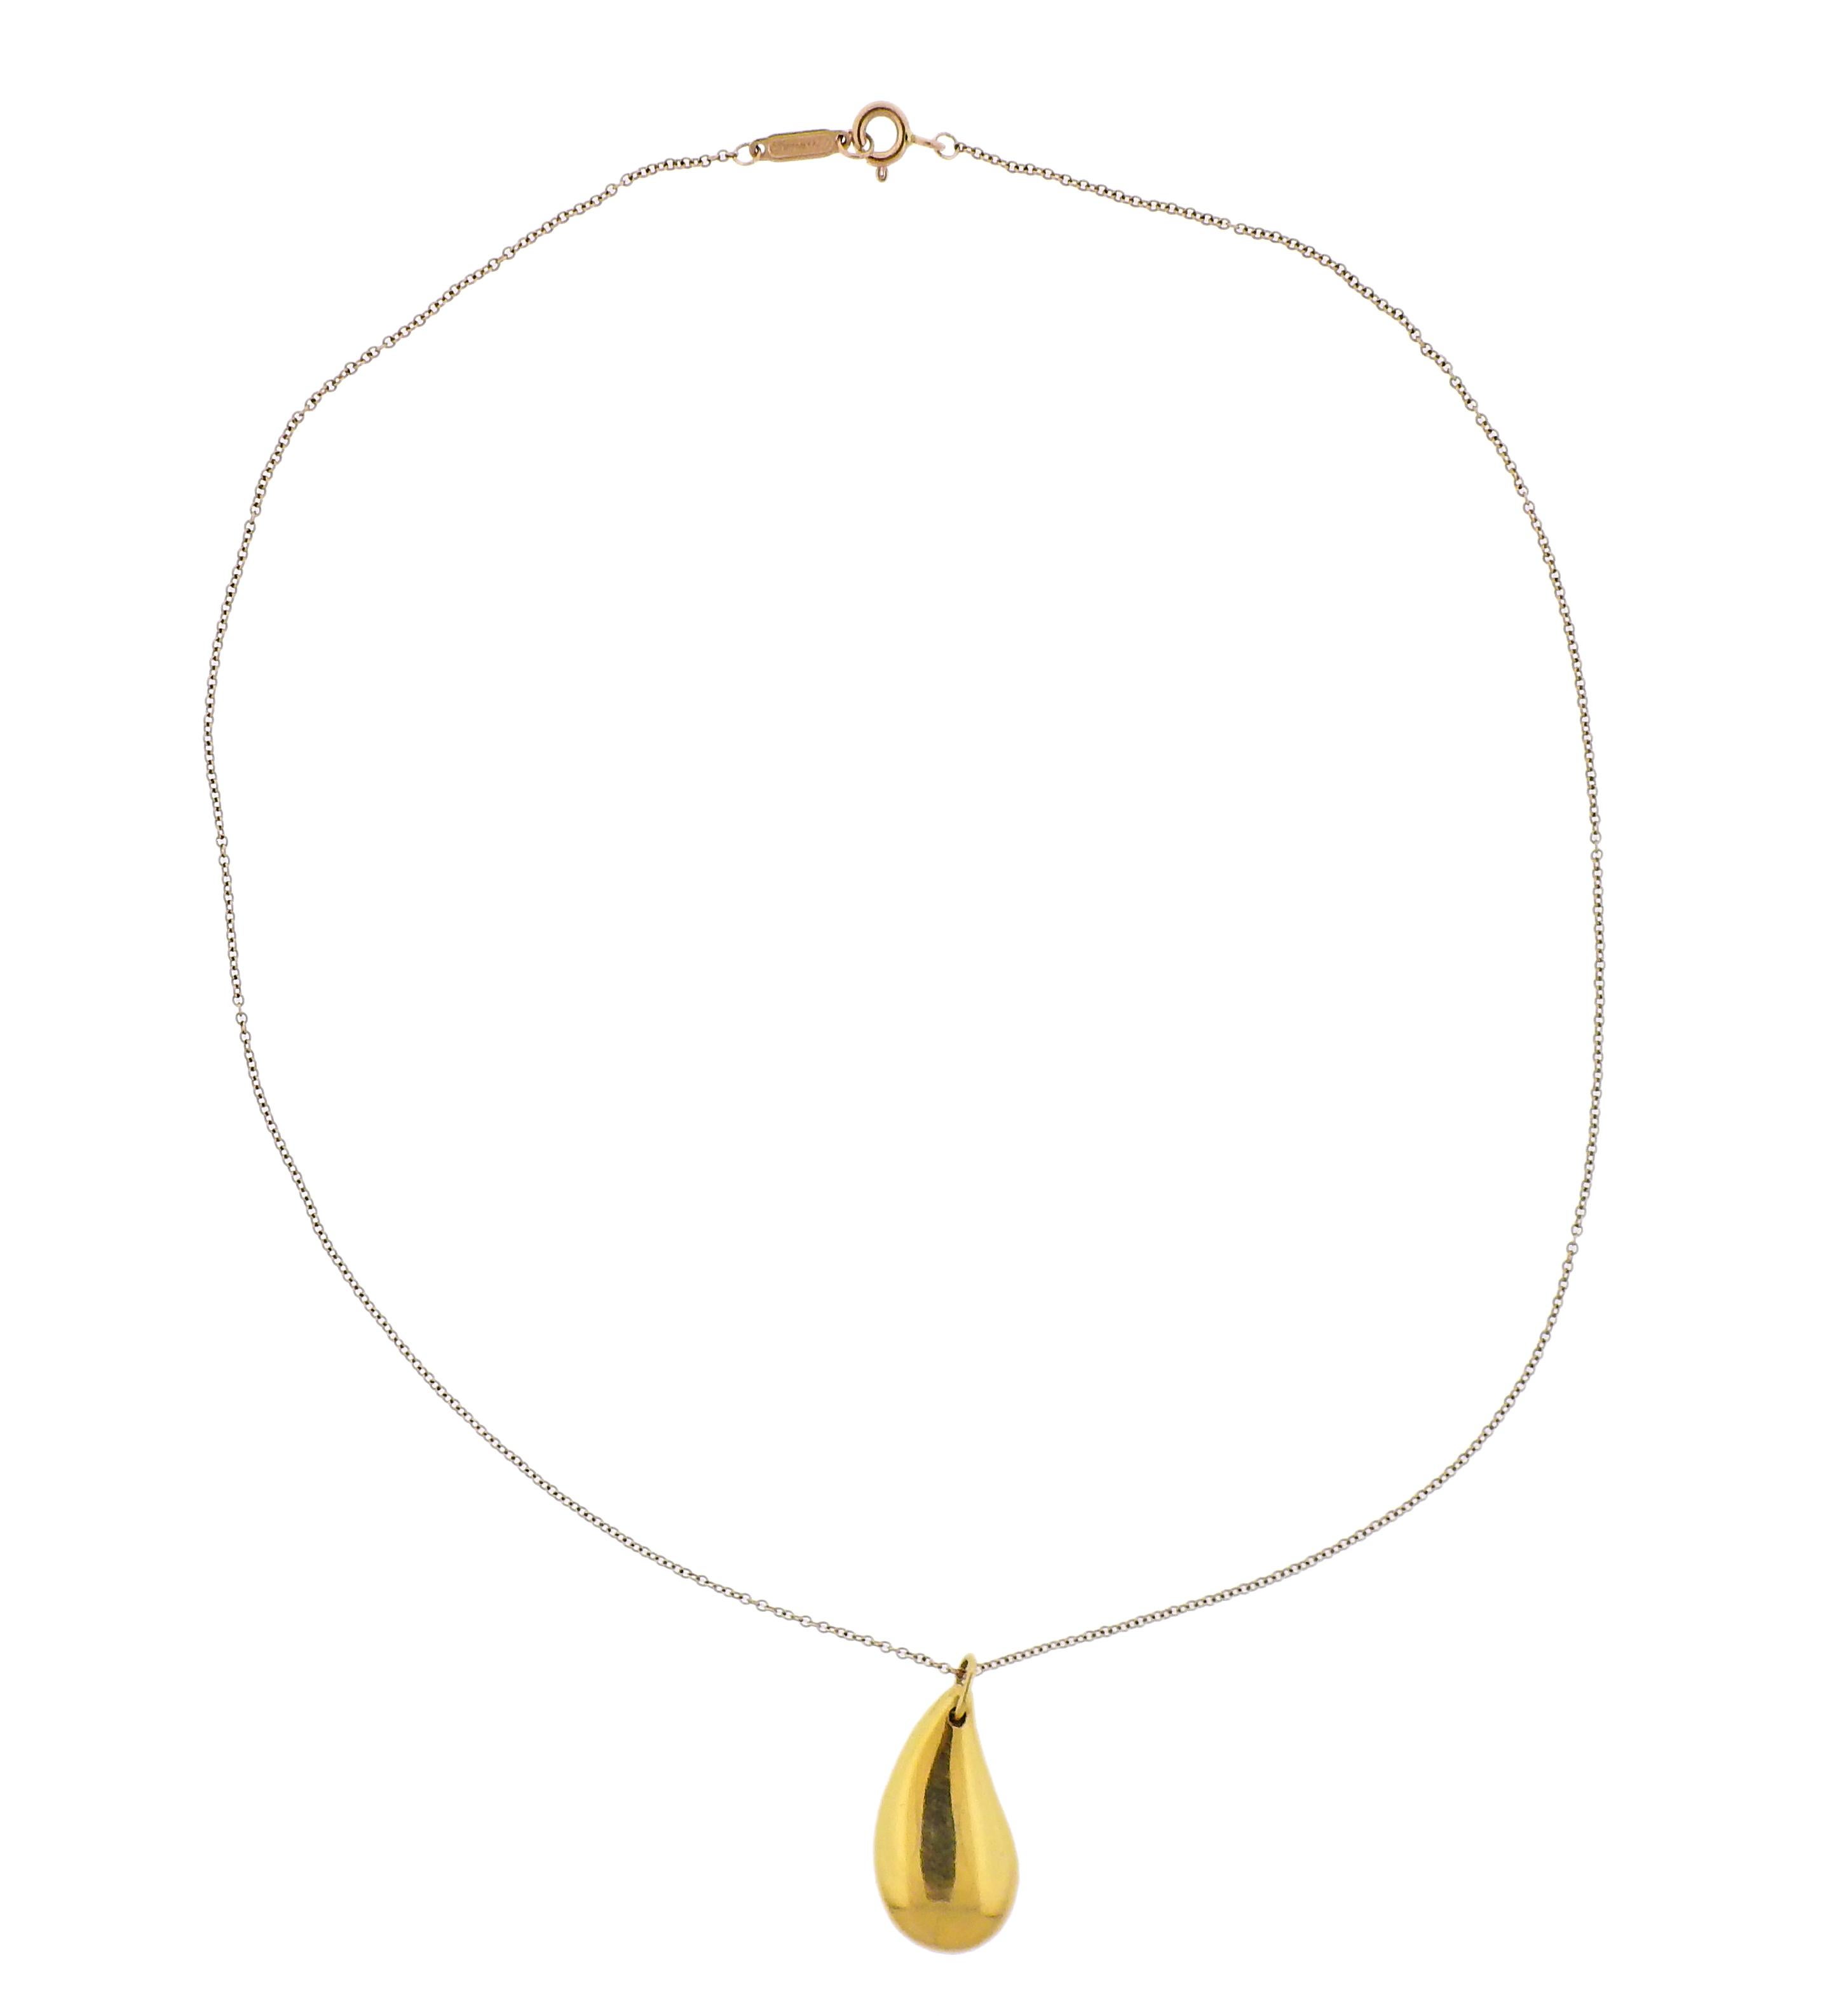 18k yellow gold teardrop pendant necklace, crafted by Elsa Peretti for Tiffany & Co. Necklace is 16